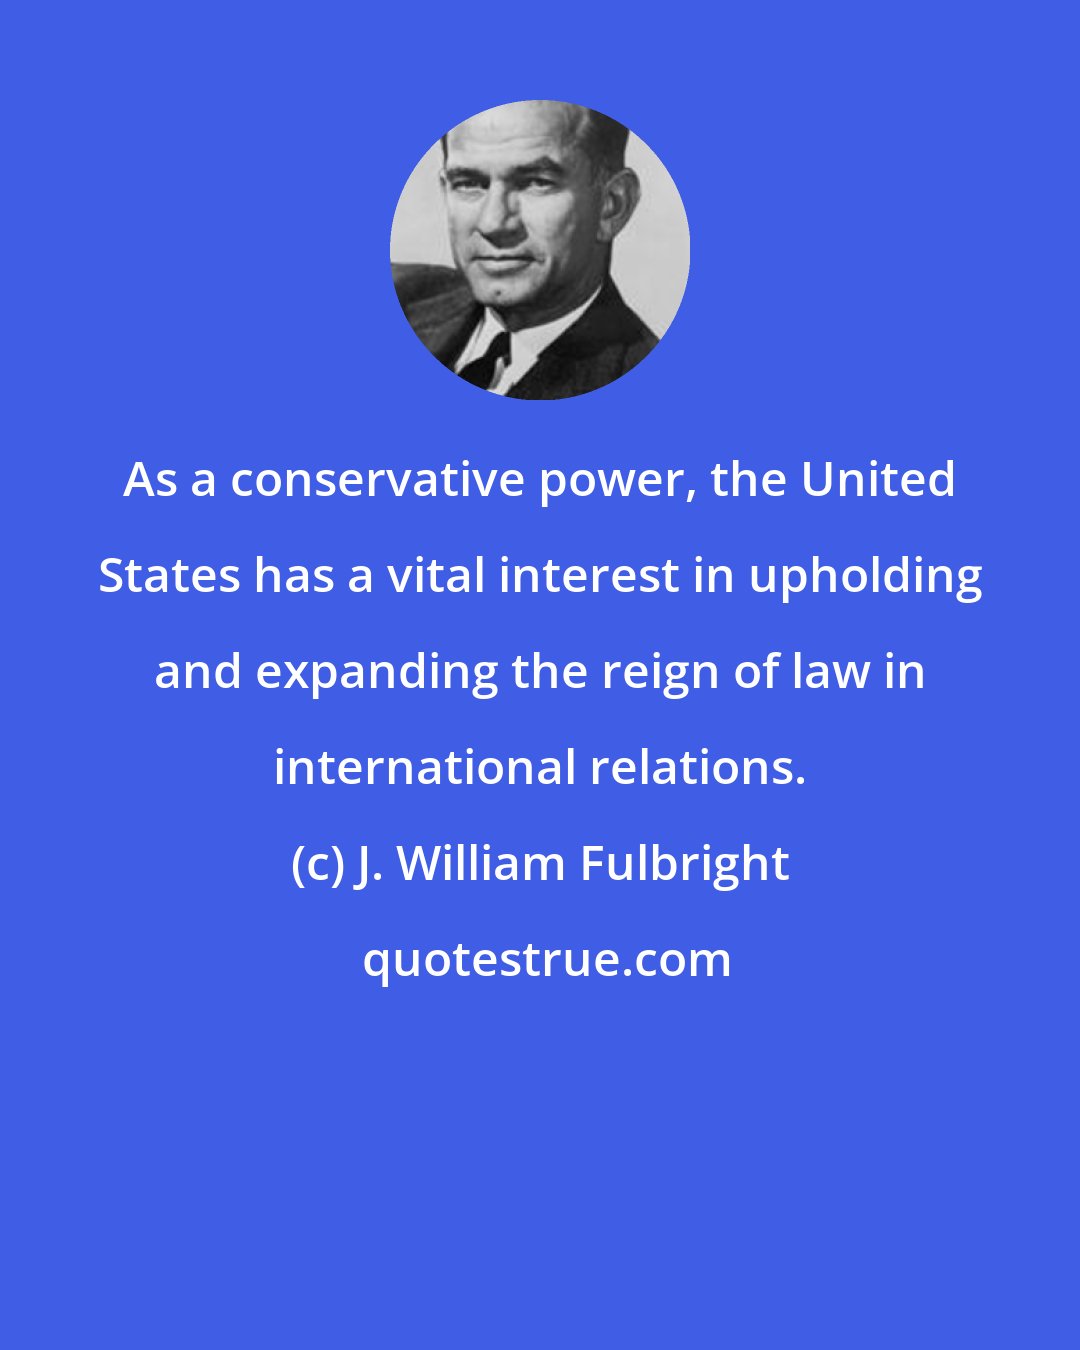 J. William Fulbright: As a conservative power, the United States has a vital interest in upholding and expanding the reign of law in international relations.